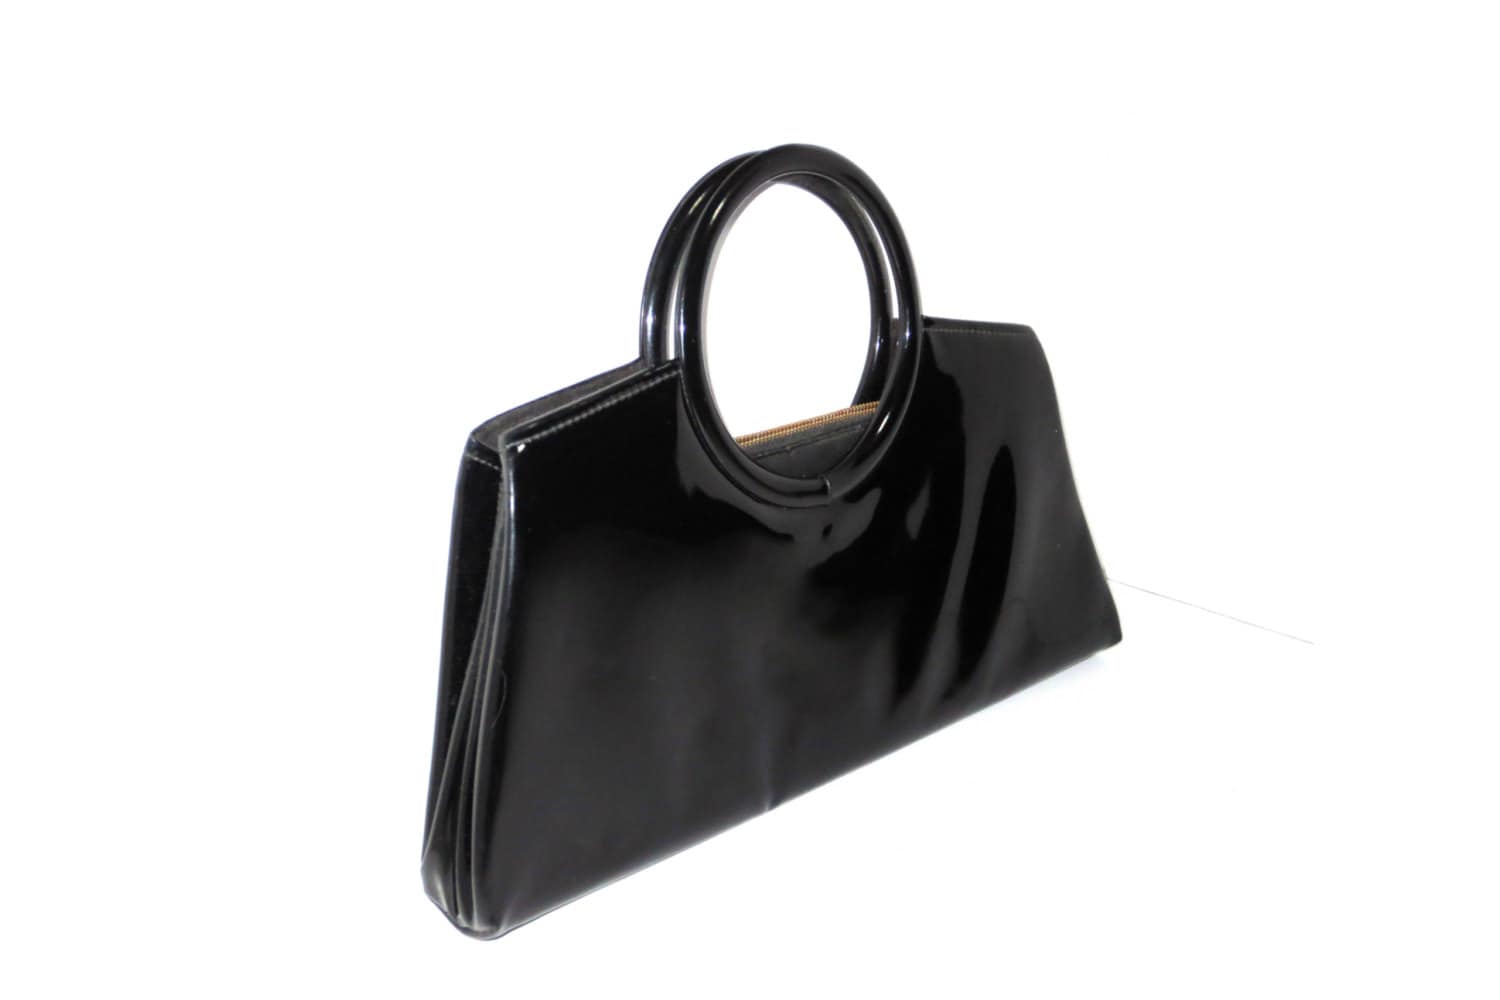 Black Patent Leather Purse Clutch with Round Handles and